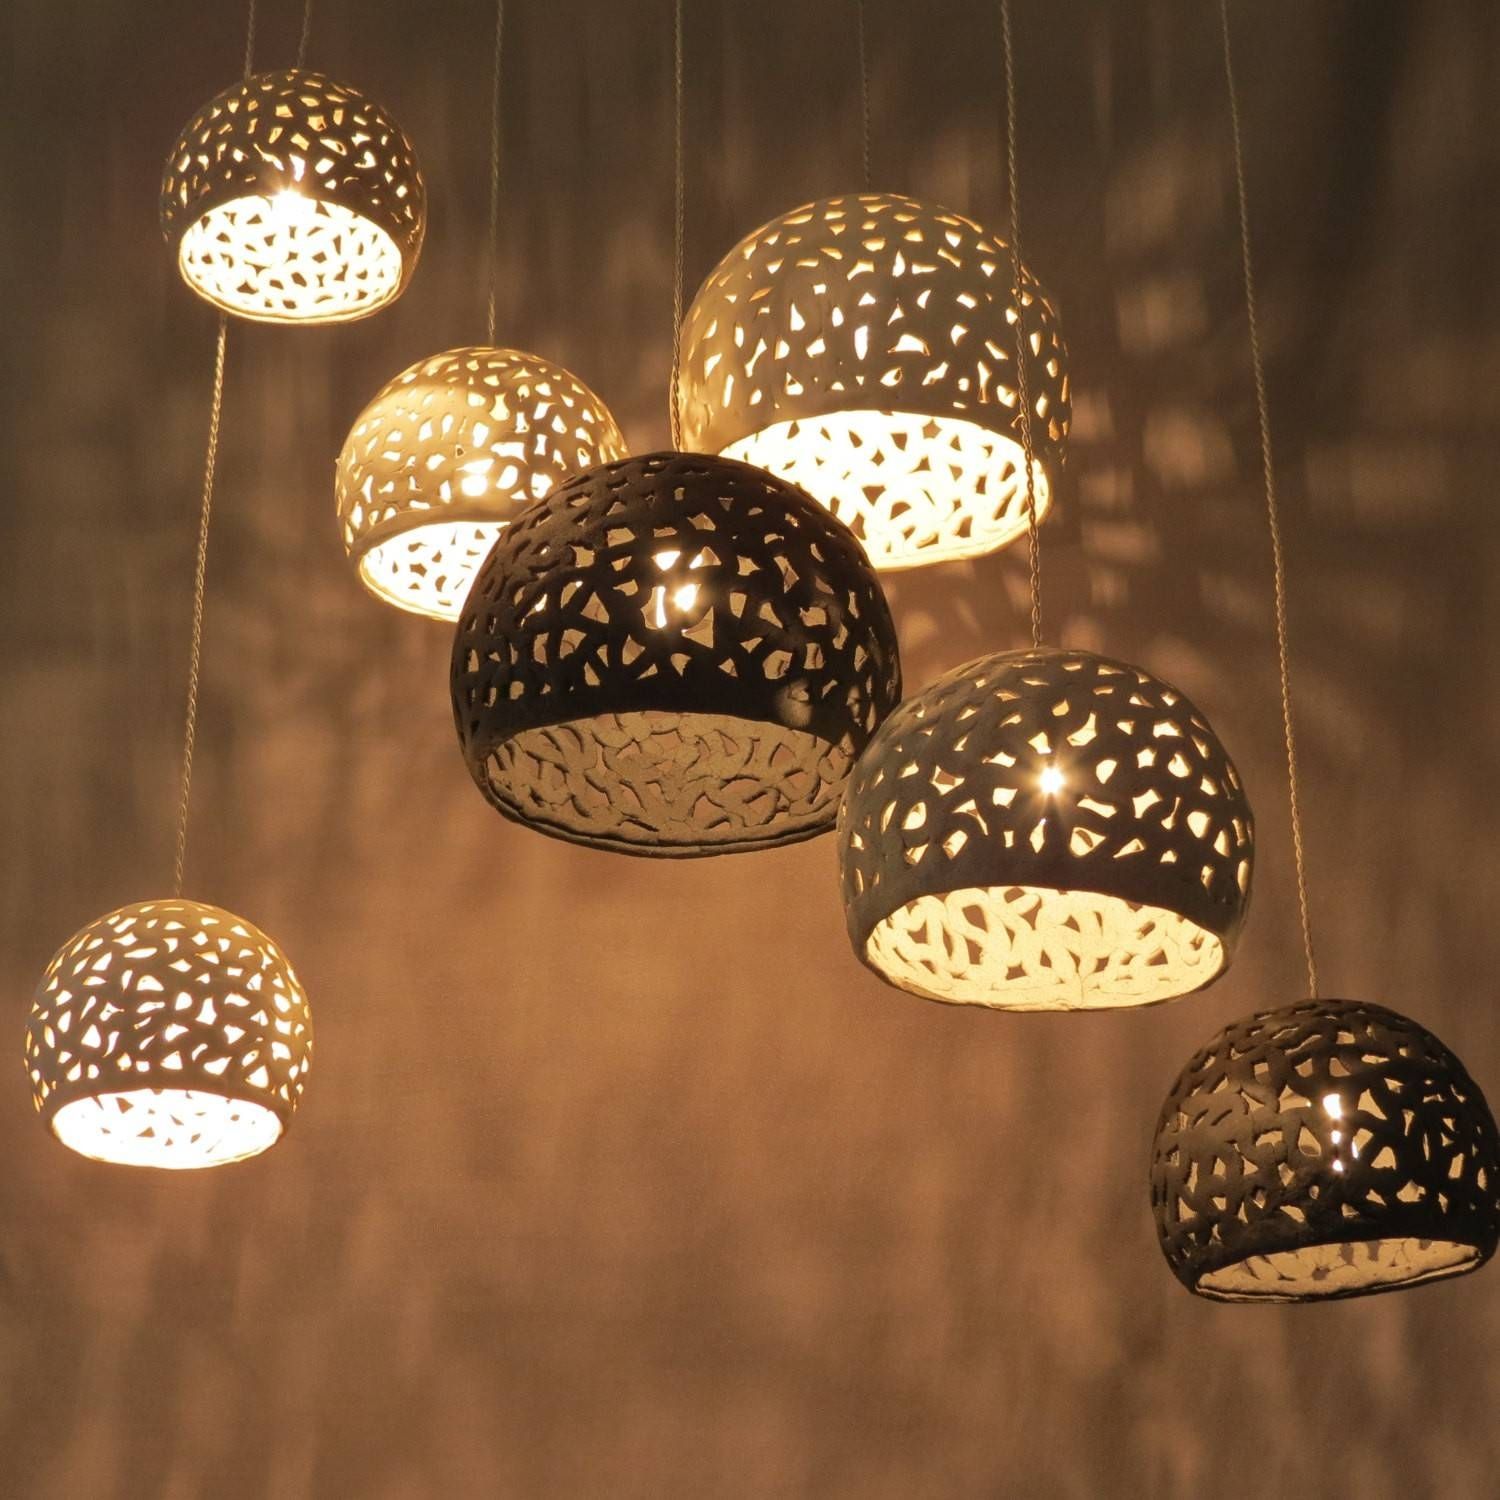 Awesome Battery Operated Pendant Light Fixtures 44 On Hanging Regarding Battery Operated Hanging Lights (View 2 of 15)